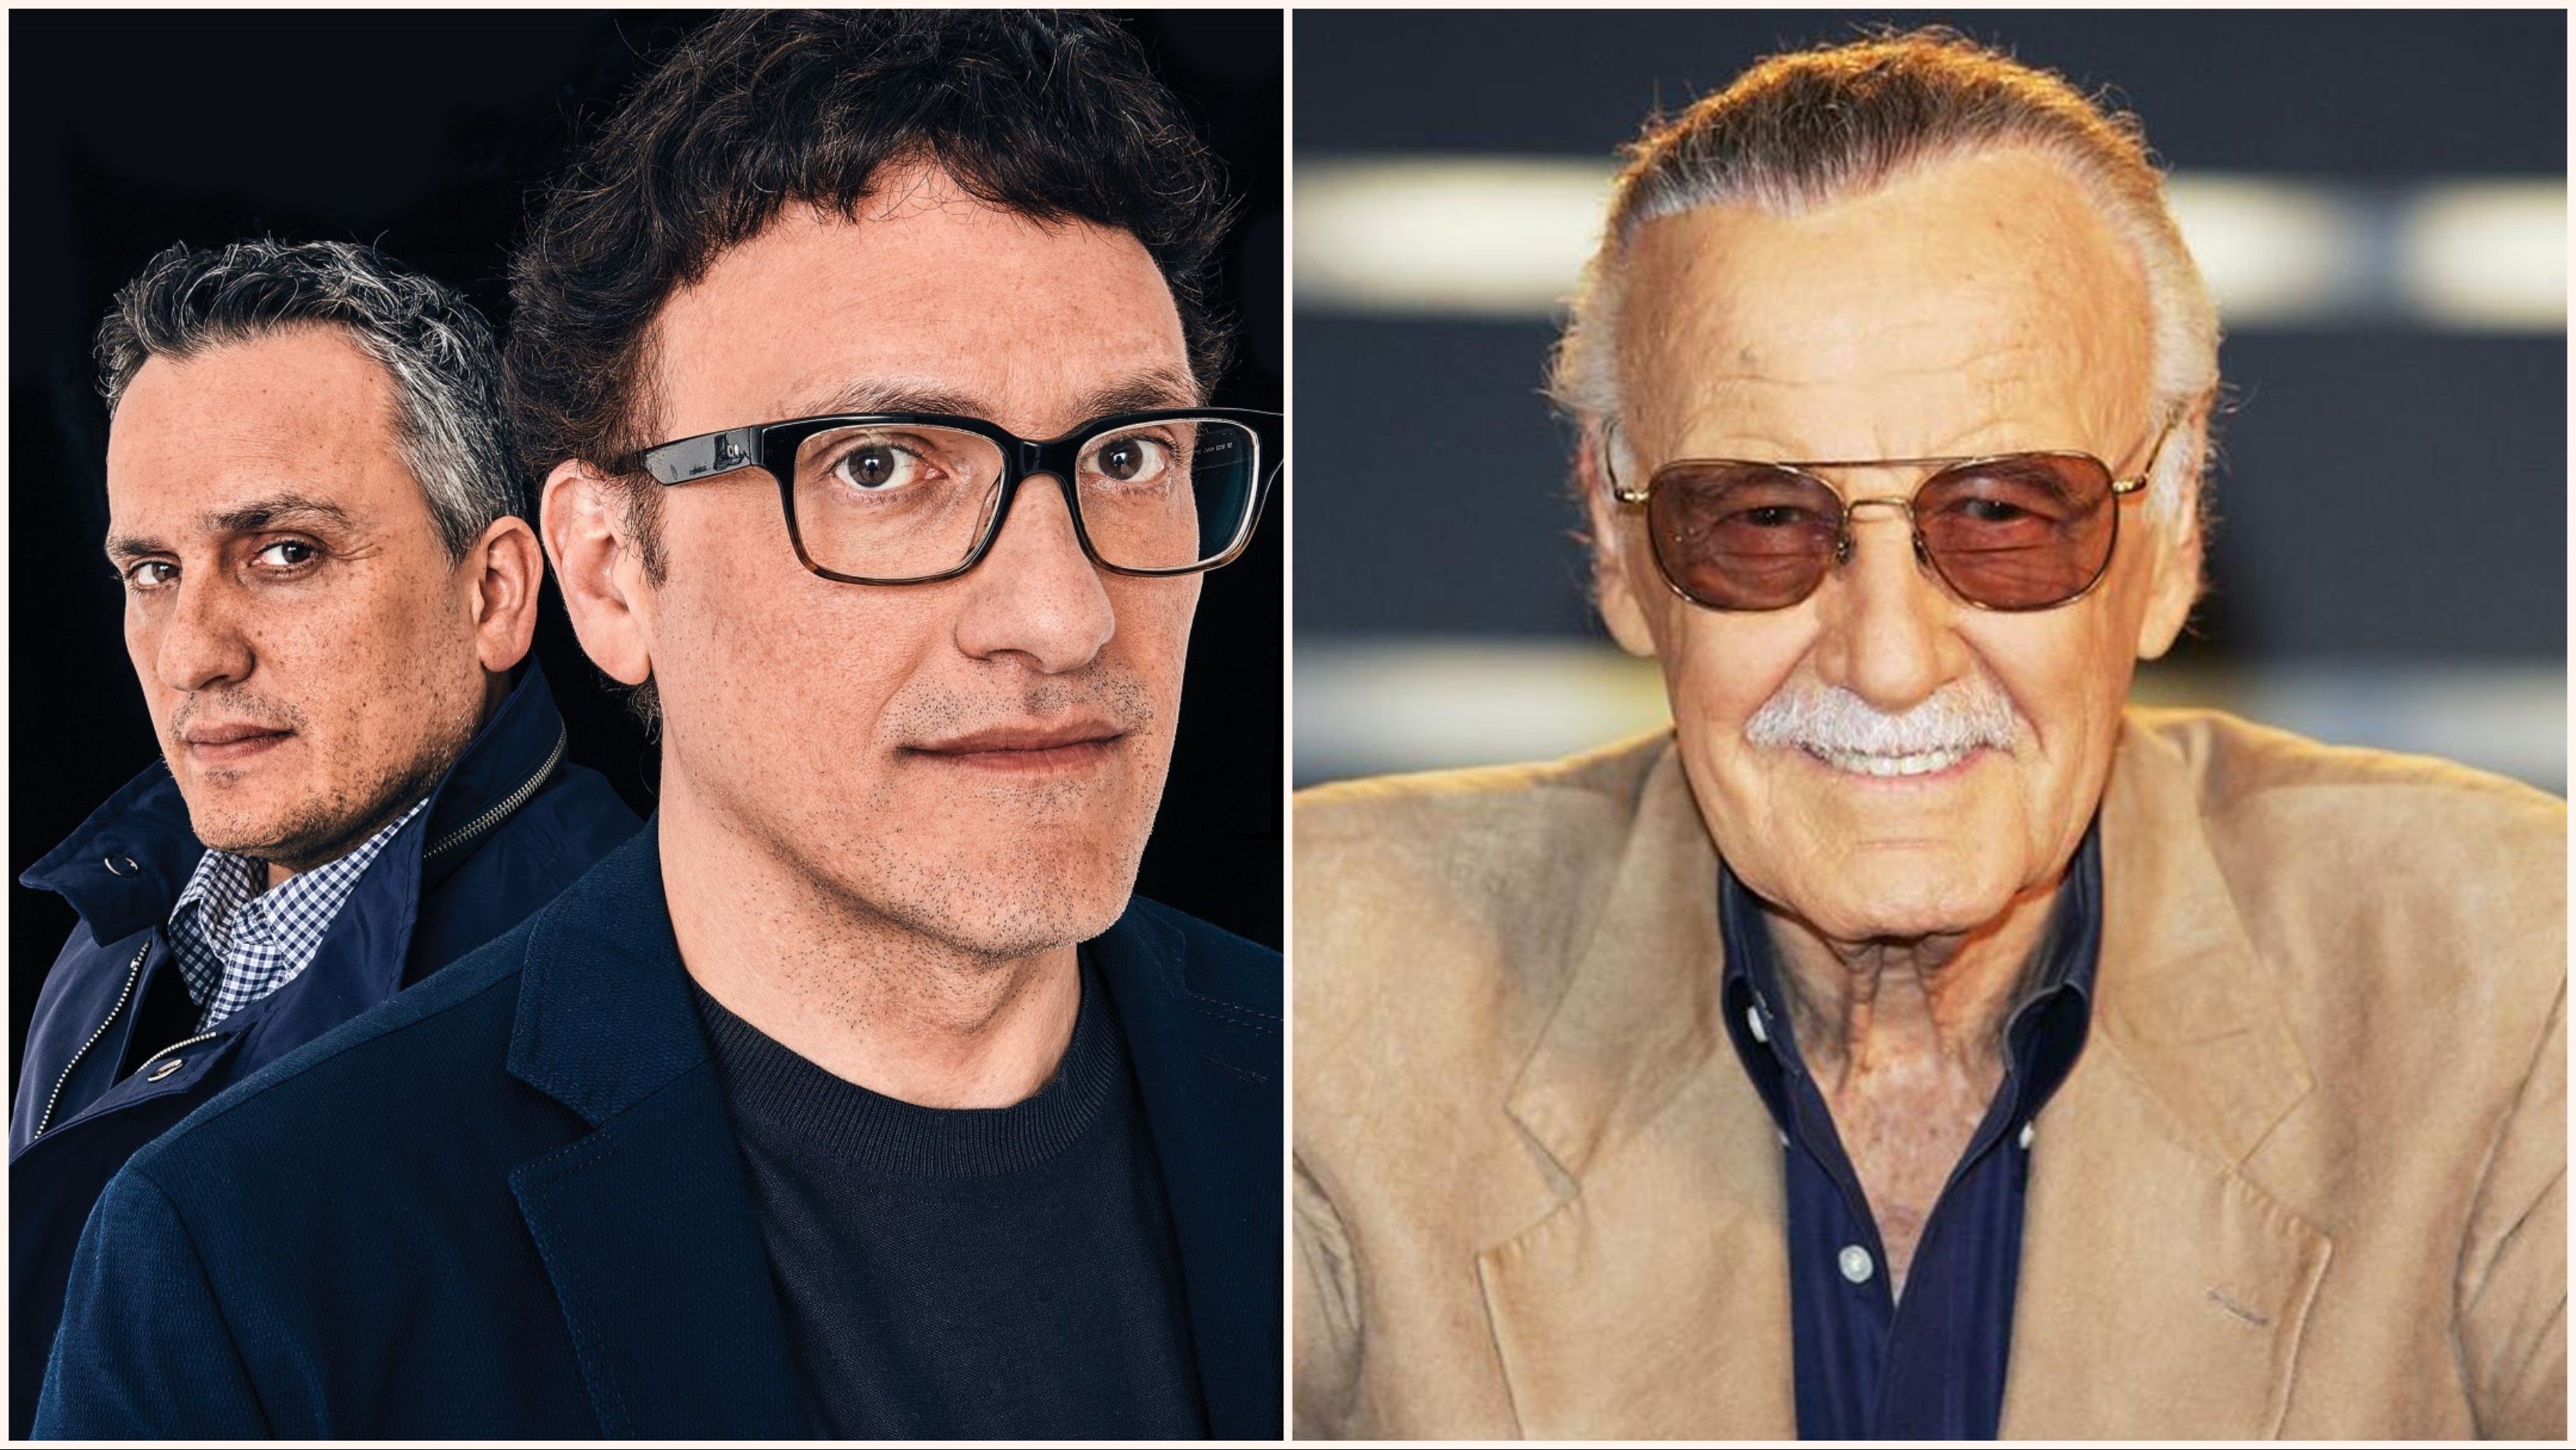 'Avengers Endgame' directors Rusoo Brothers Reportedly Working on Stan Lee Documentary